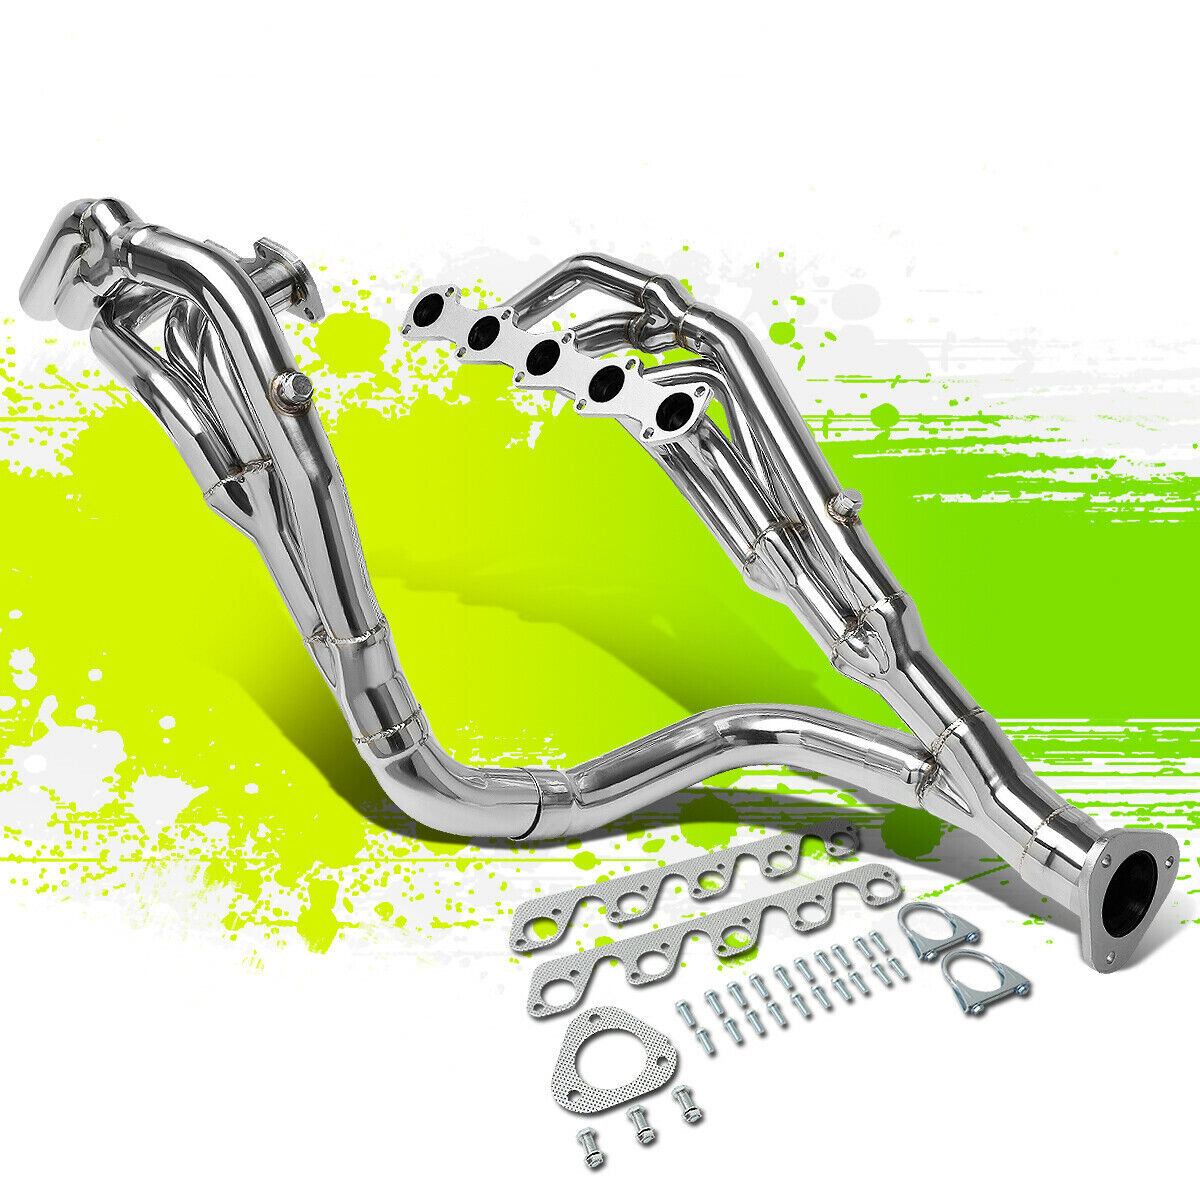 Stainless Steel Exhaust Headers for Ford F-250 F-350 Super Duty 6.8L V10 99-04